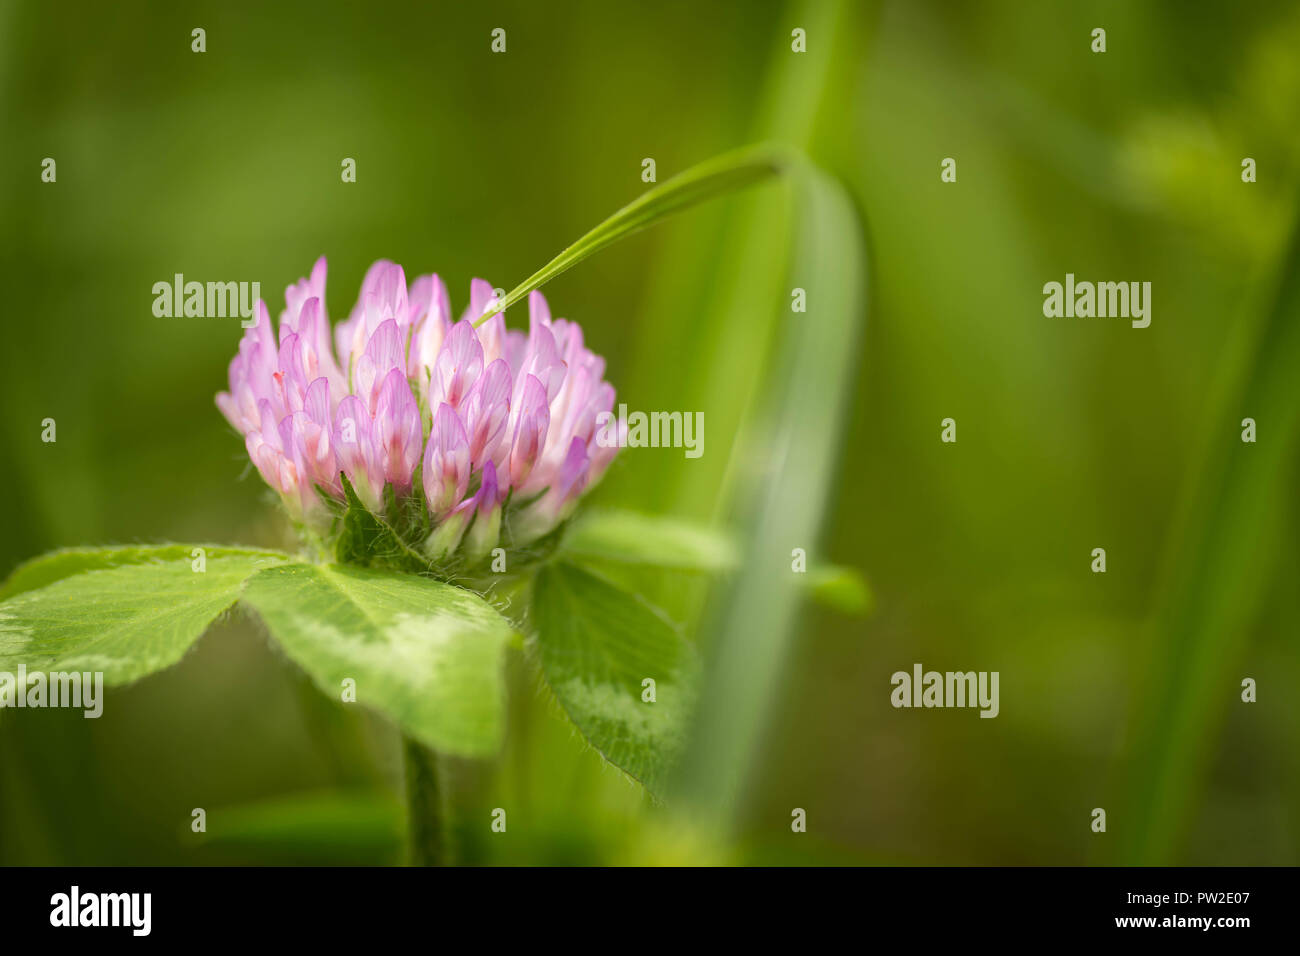 A macro shot of a small pink flower surrounded by green grasses. Good desktop wallpaper. Stock Photo